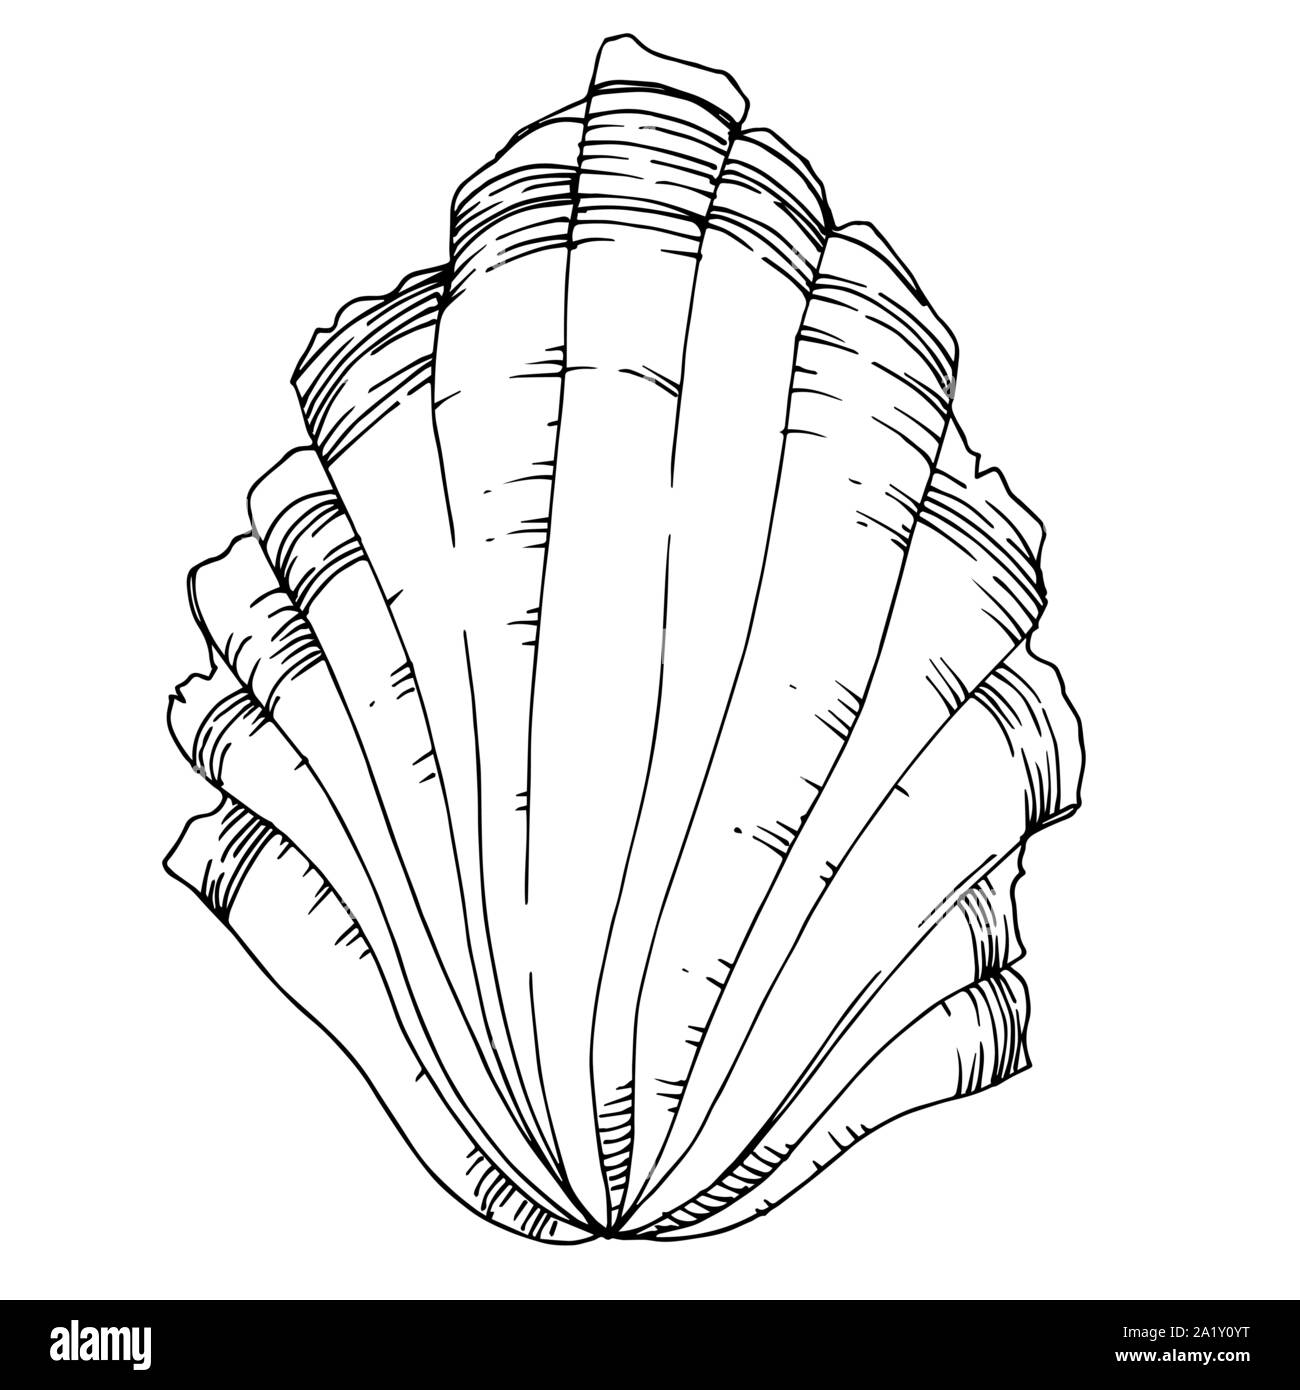 https://c8.alamy.com/comp/2A1Y0YT/vector-summer-beach-seashell-tropical-elements-black-and-white-engraved-ink-art-isolated-shells-illustration-element-on-vhite-background-2A1Y0YT.jpg